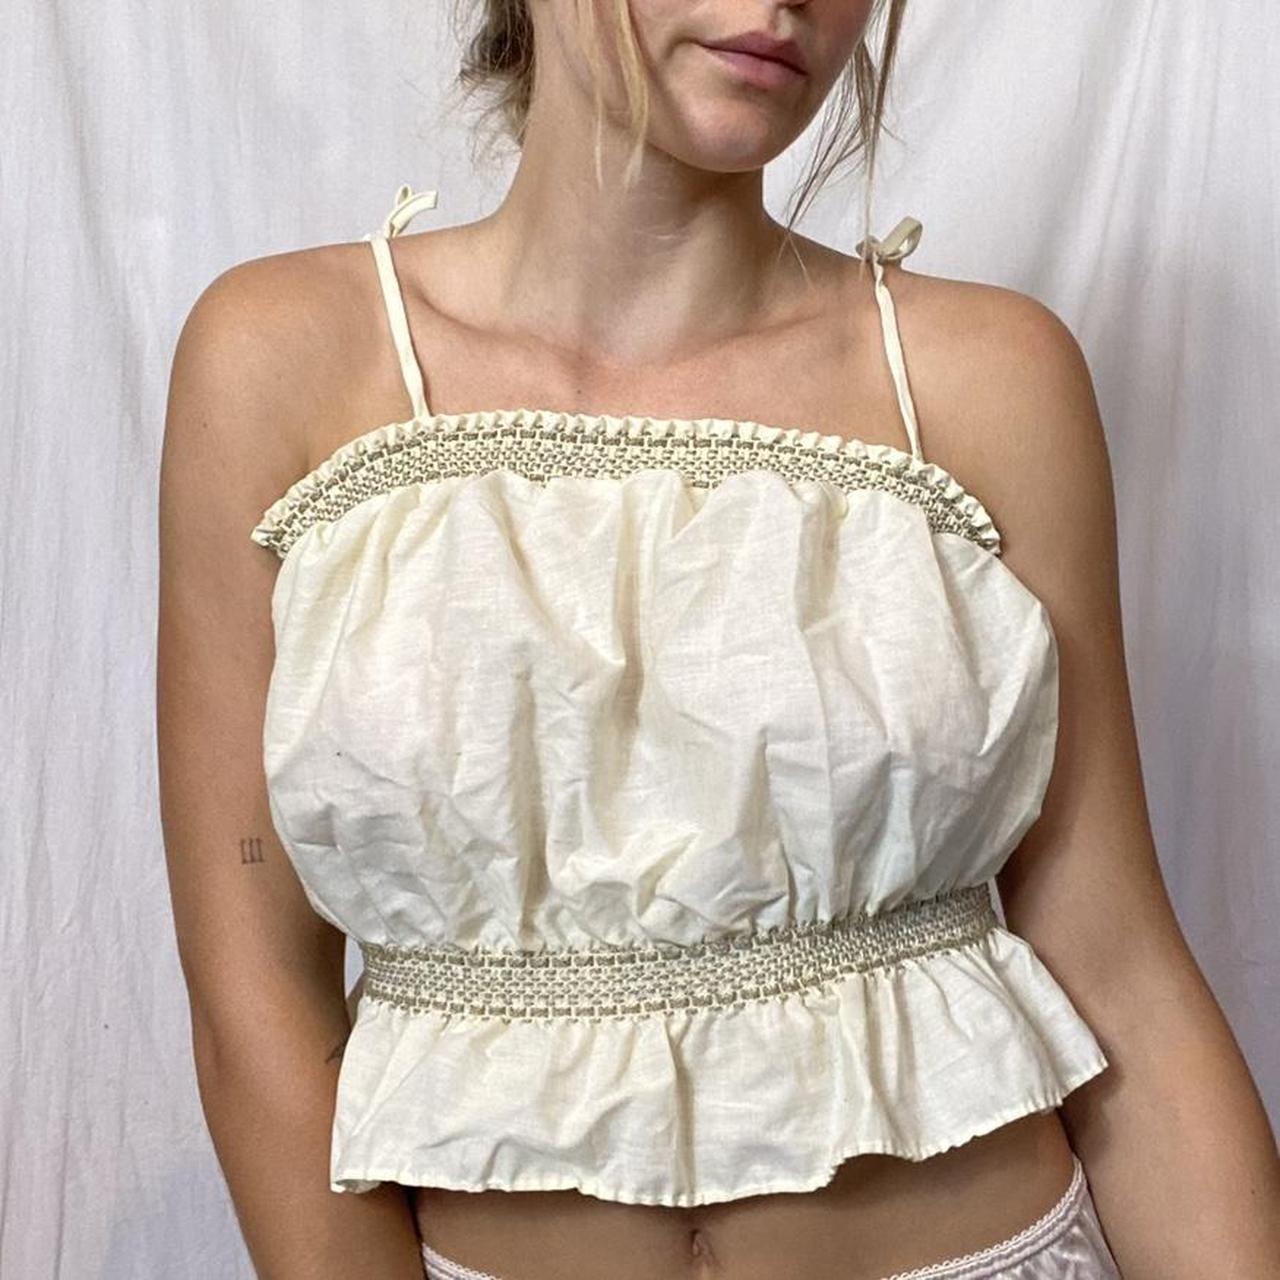 Product Image 2 - Vintage 70s California style crop